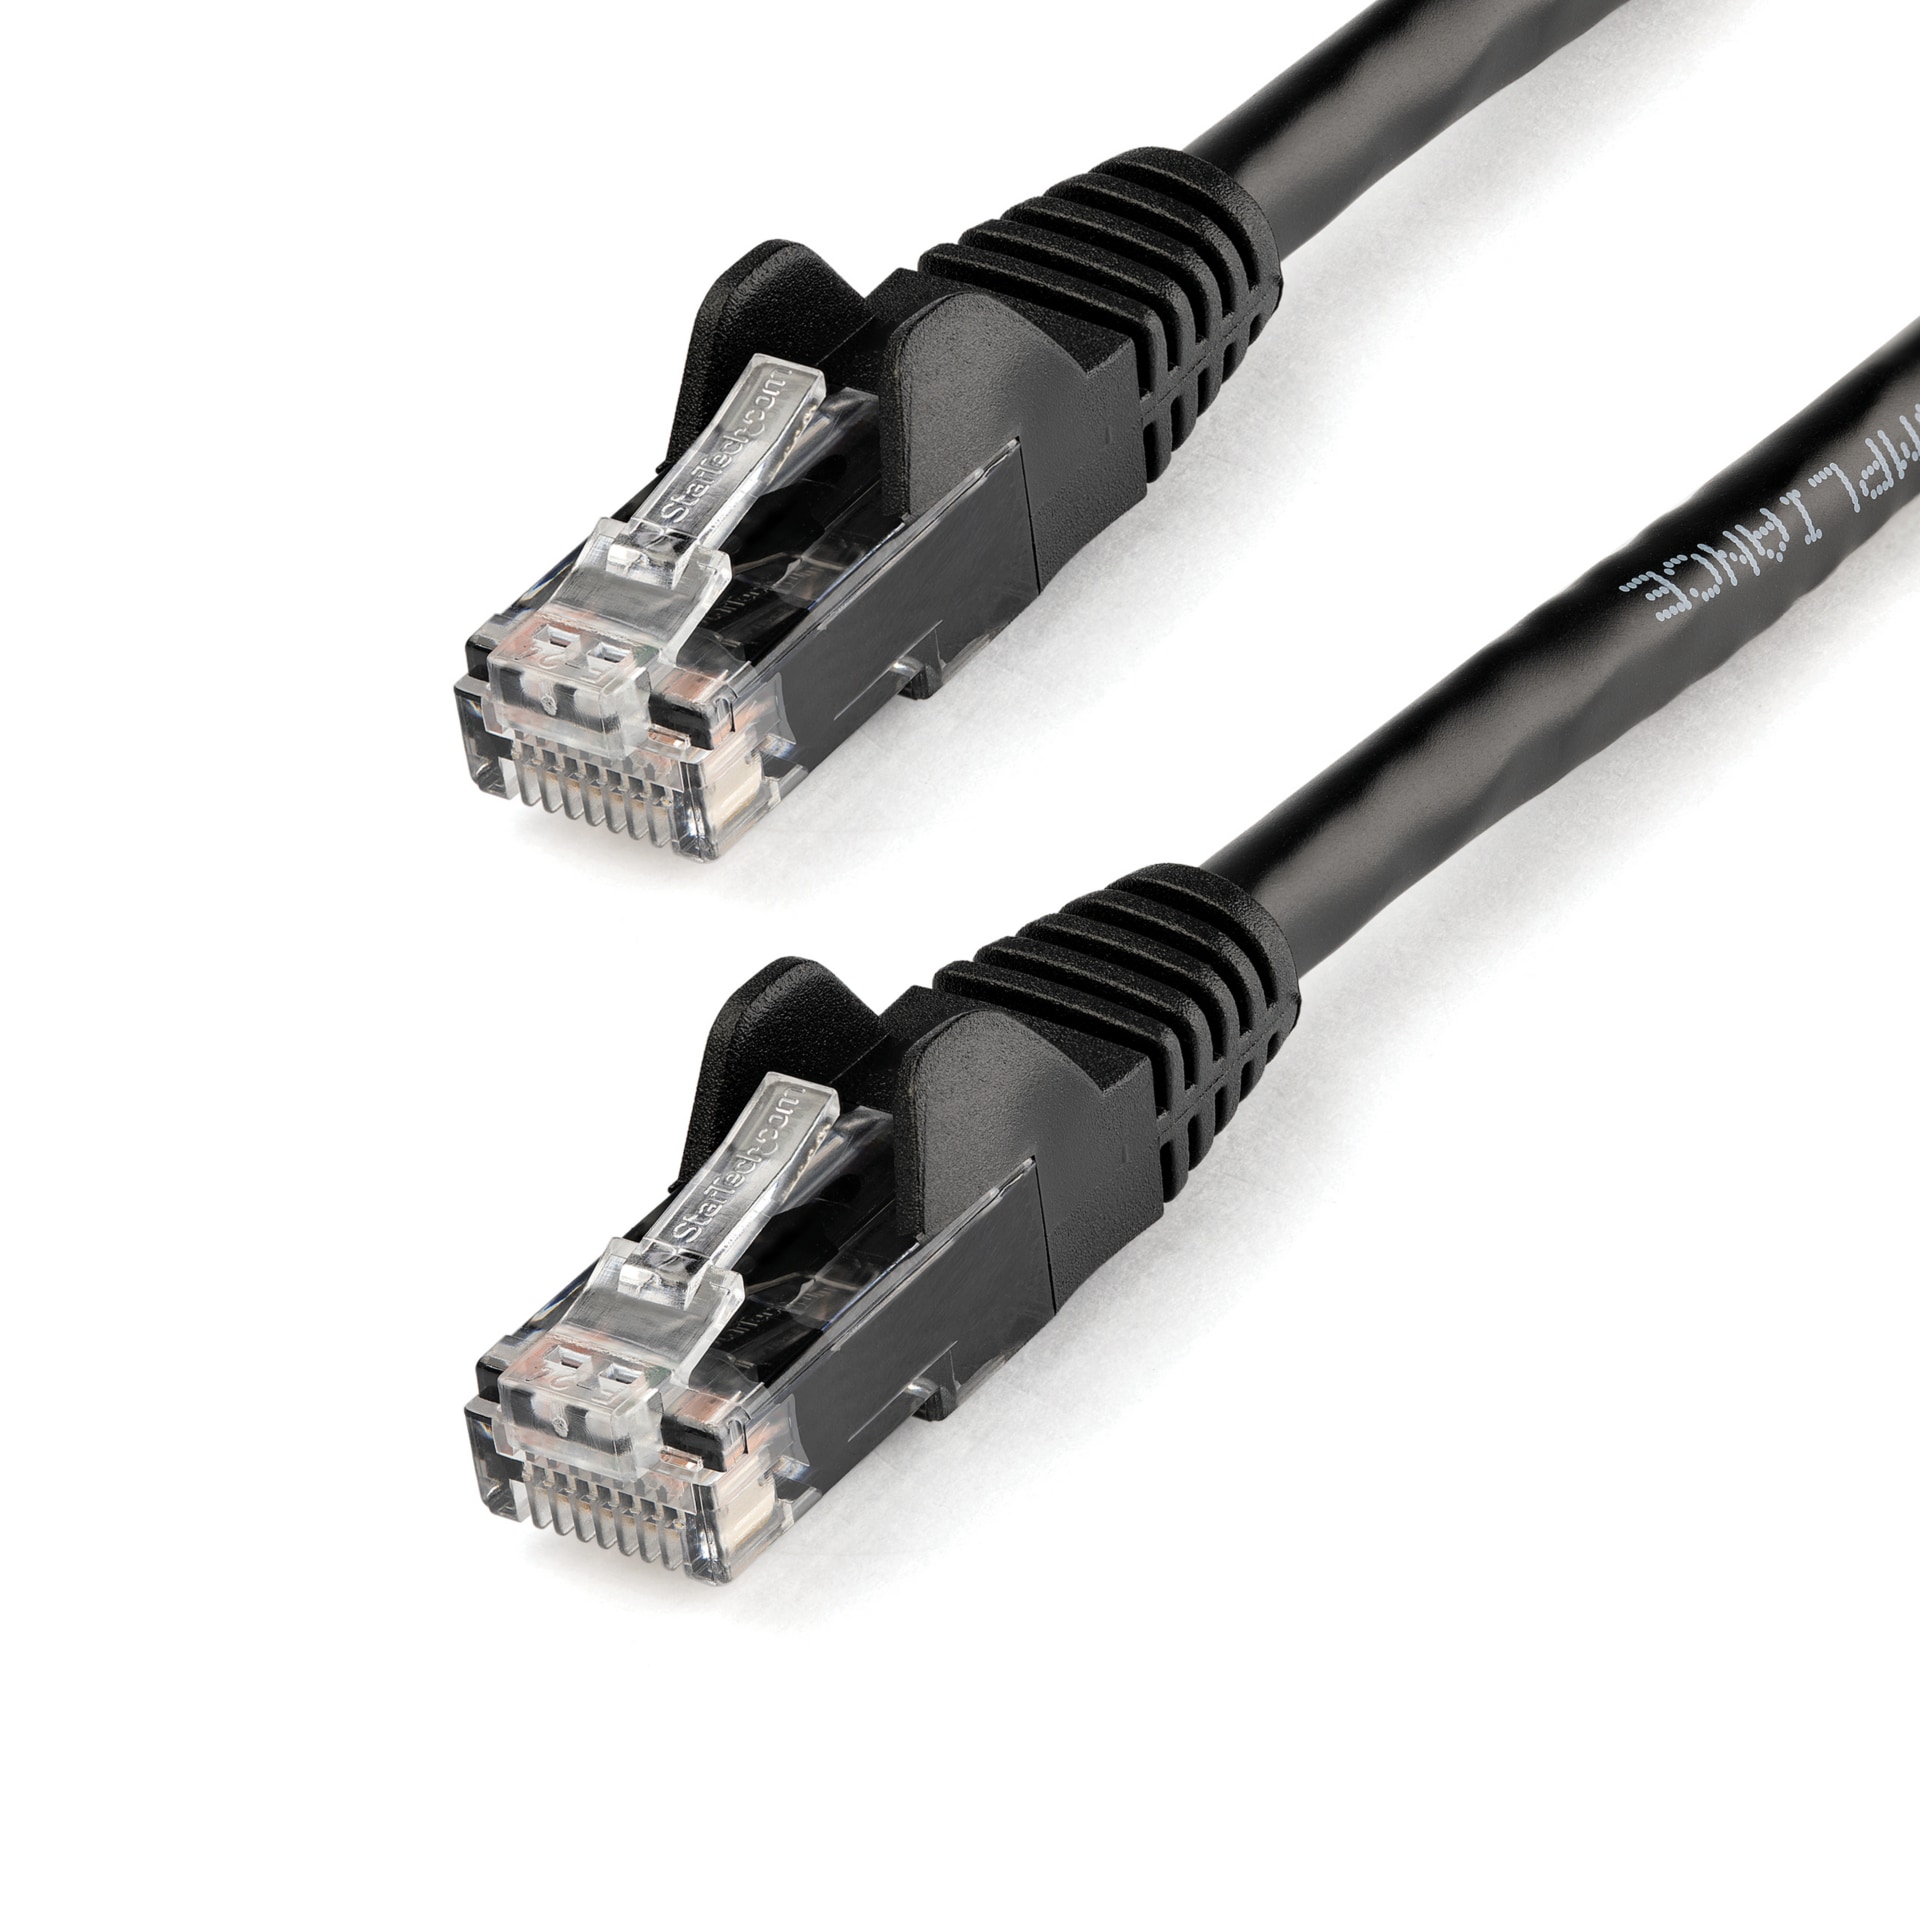 StarTech.com 6in CAT6 Ethernet Cable Black Snagless UTP CAT 6 Gigabit Cord/Wire 100W PoE 650MHz